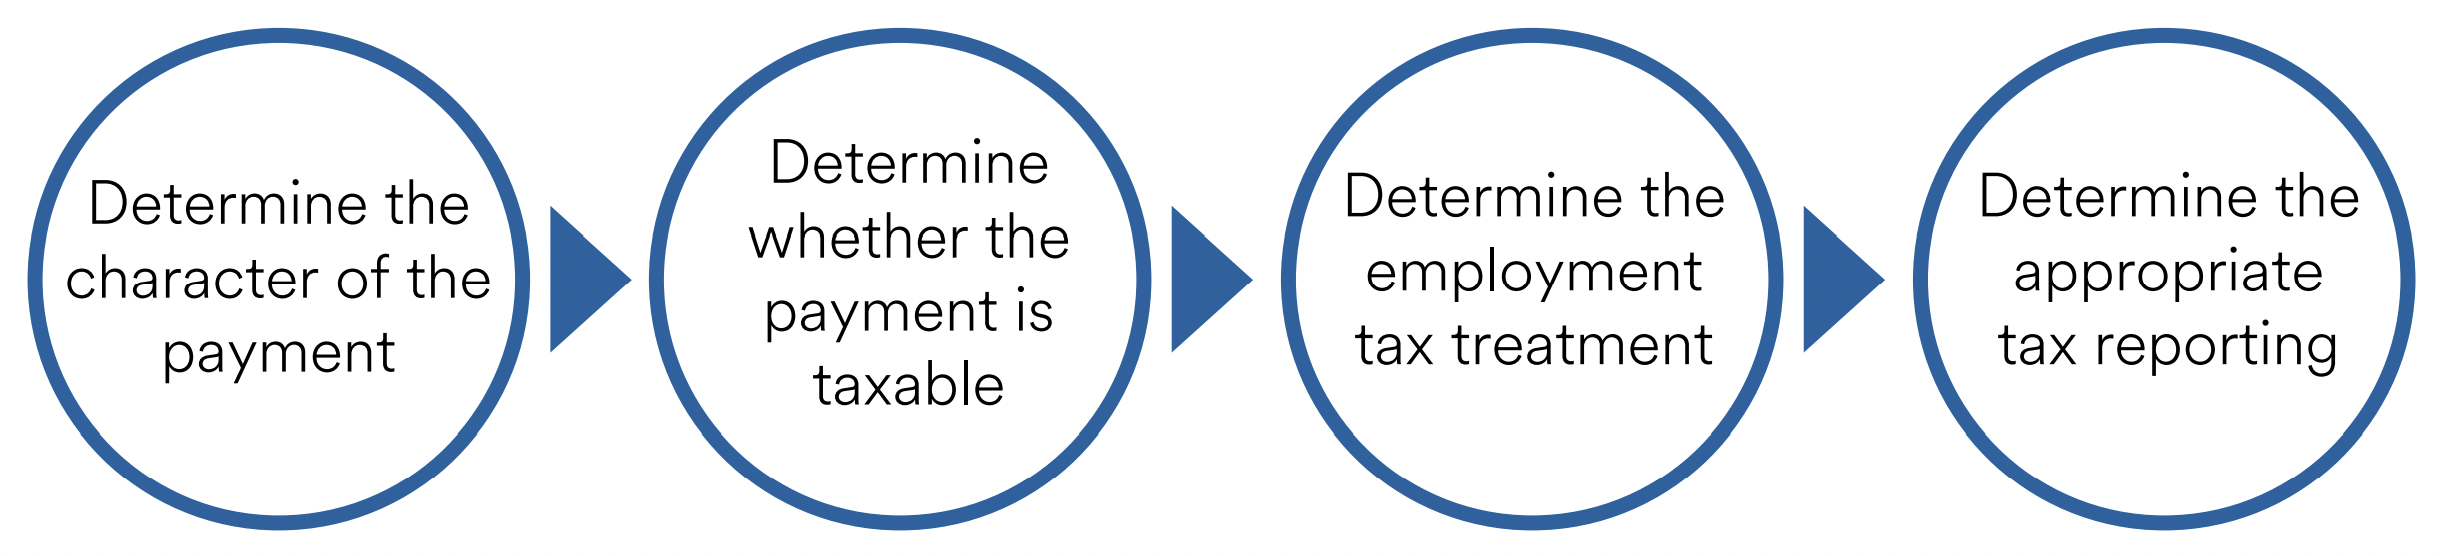 Treatment of Employee Payment Example Image